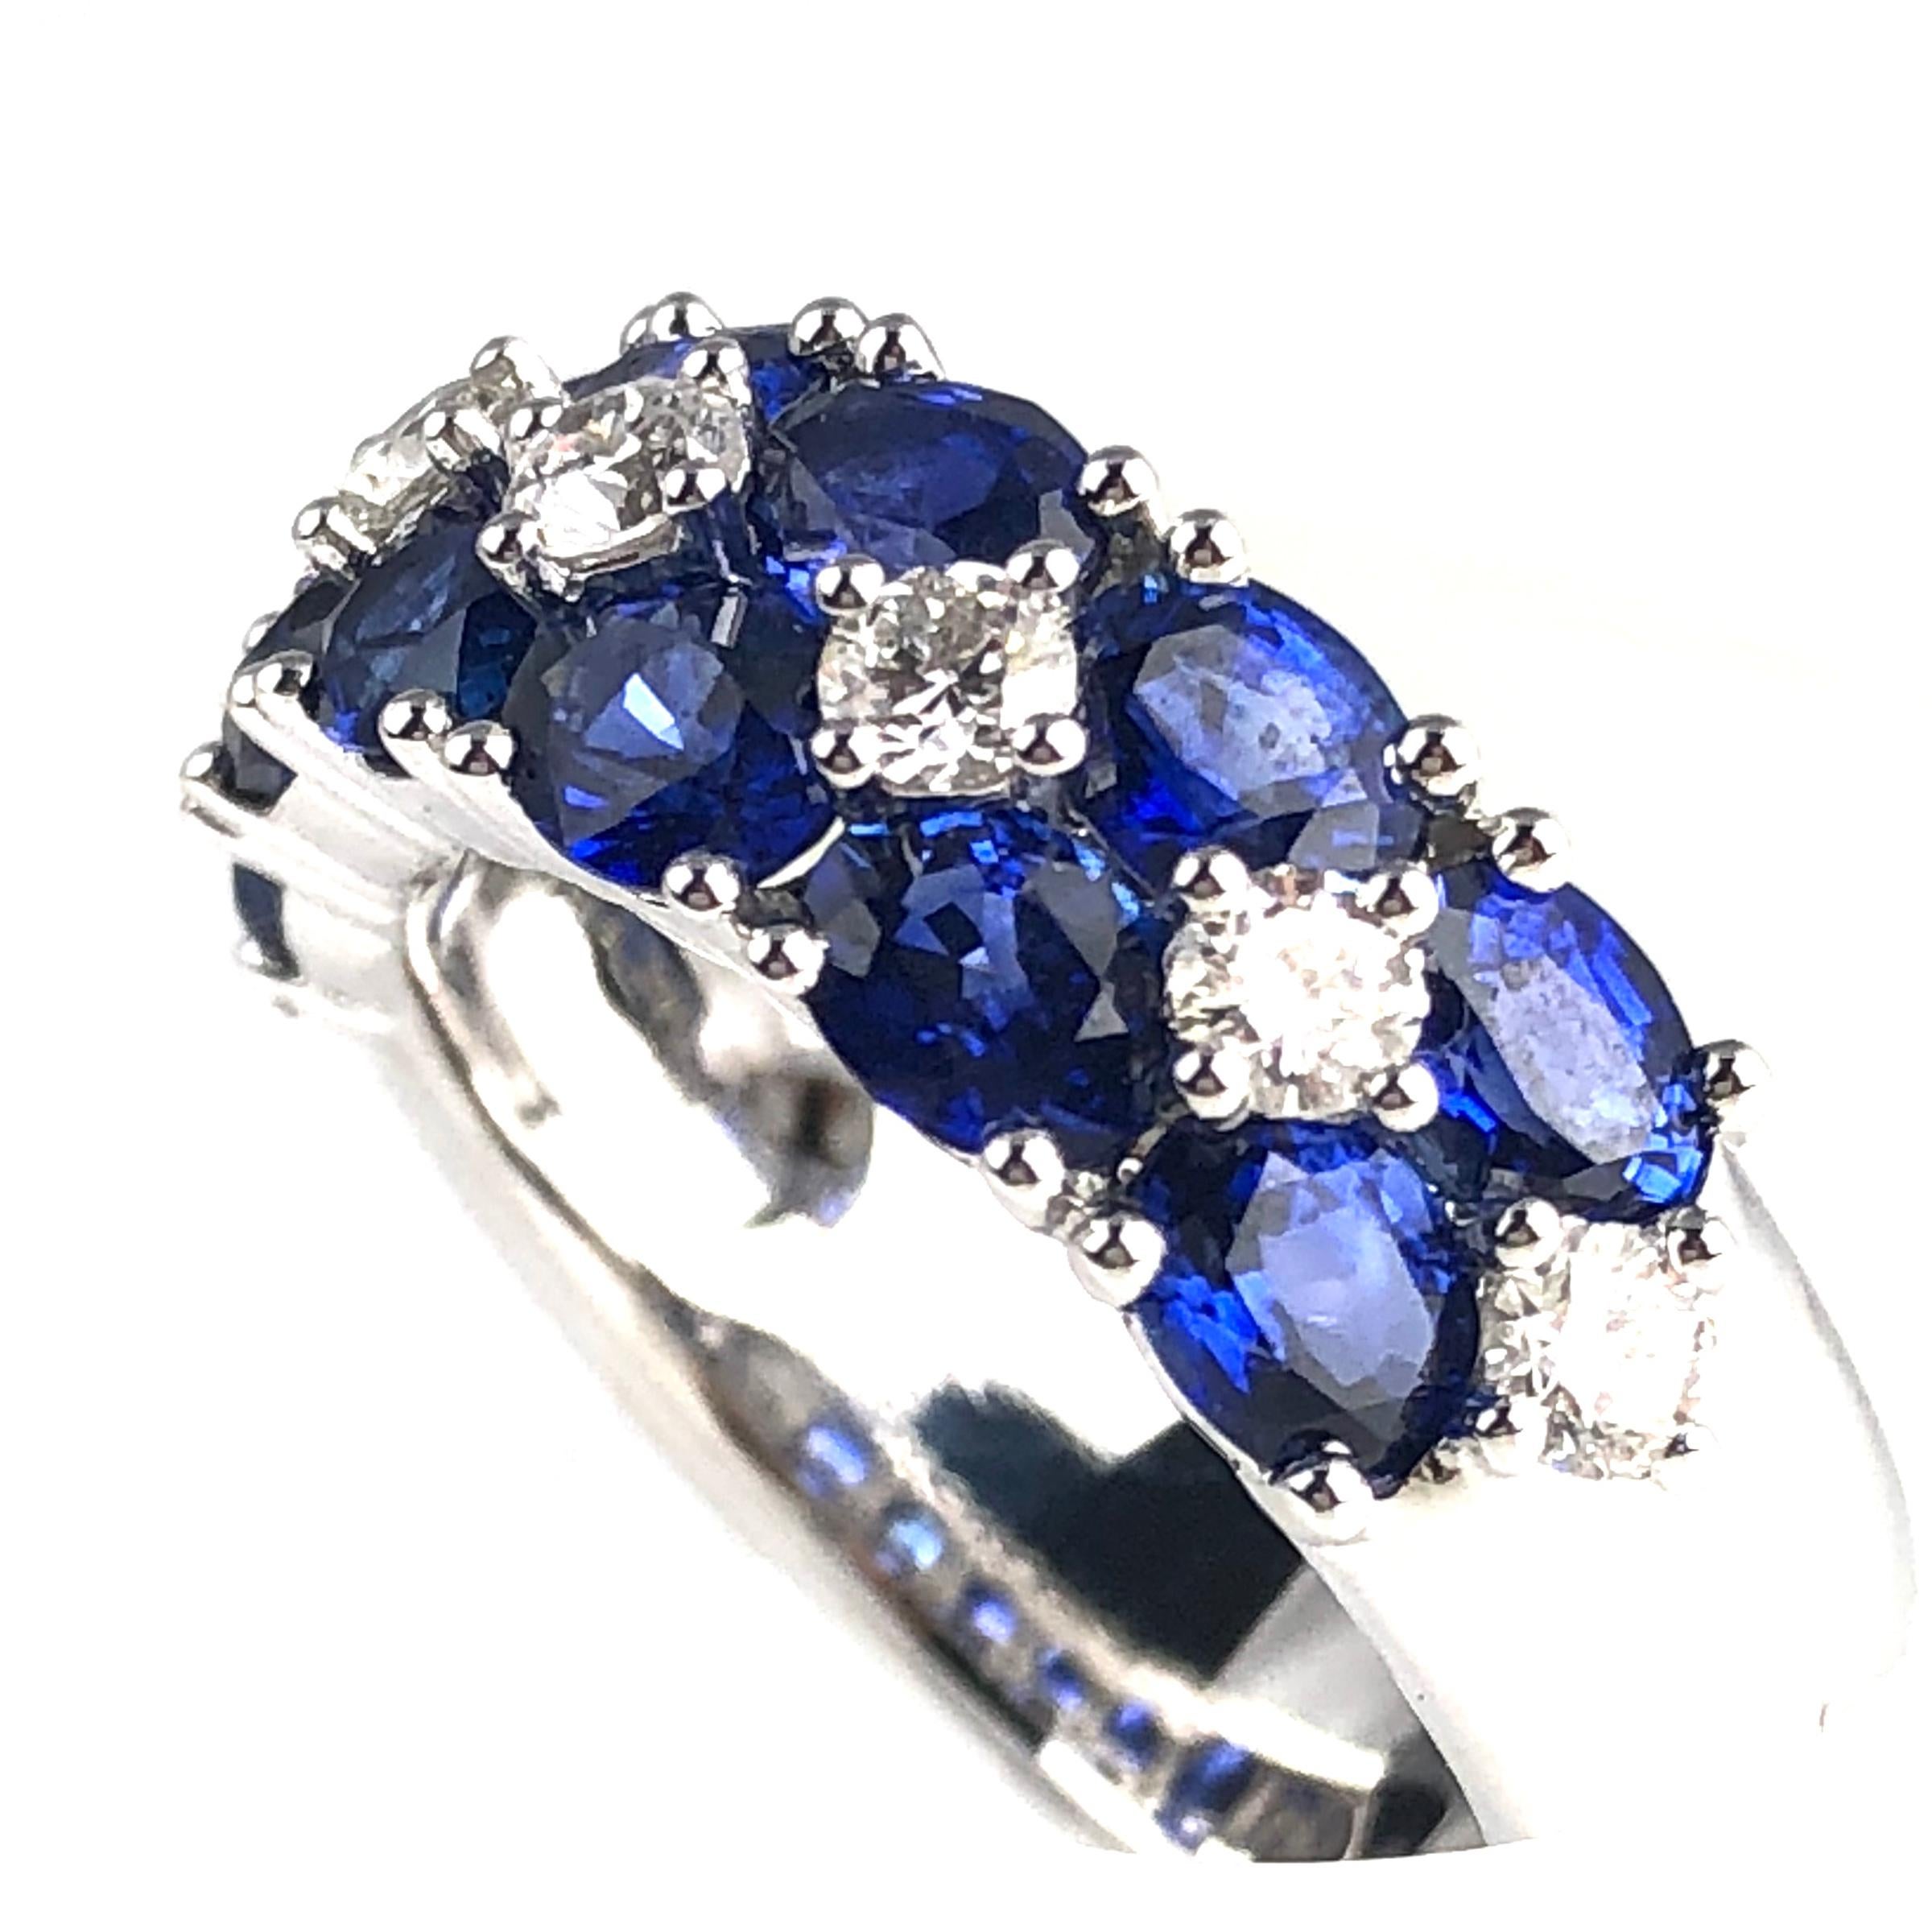 This gorgeous handcrafted ring features 12 oval cut vivid blue sapphires tucked among 0.52 carats white diamonds. The layered design extends across the full width of the band.

This ring can be professionally sized to your specification, at no